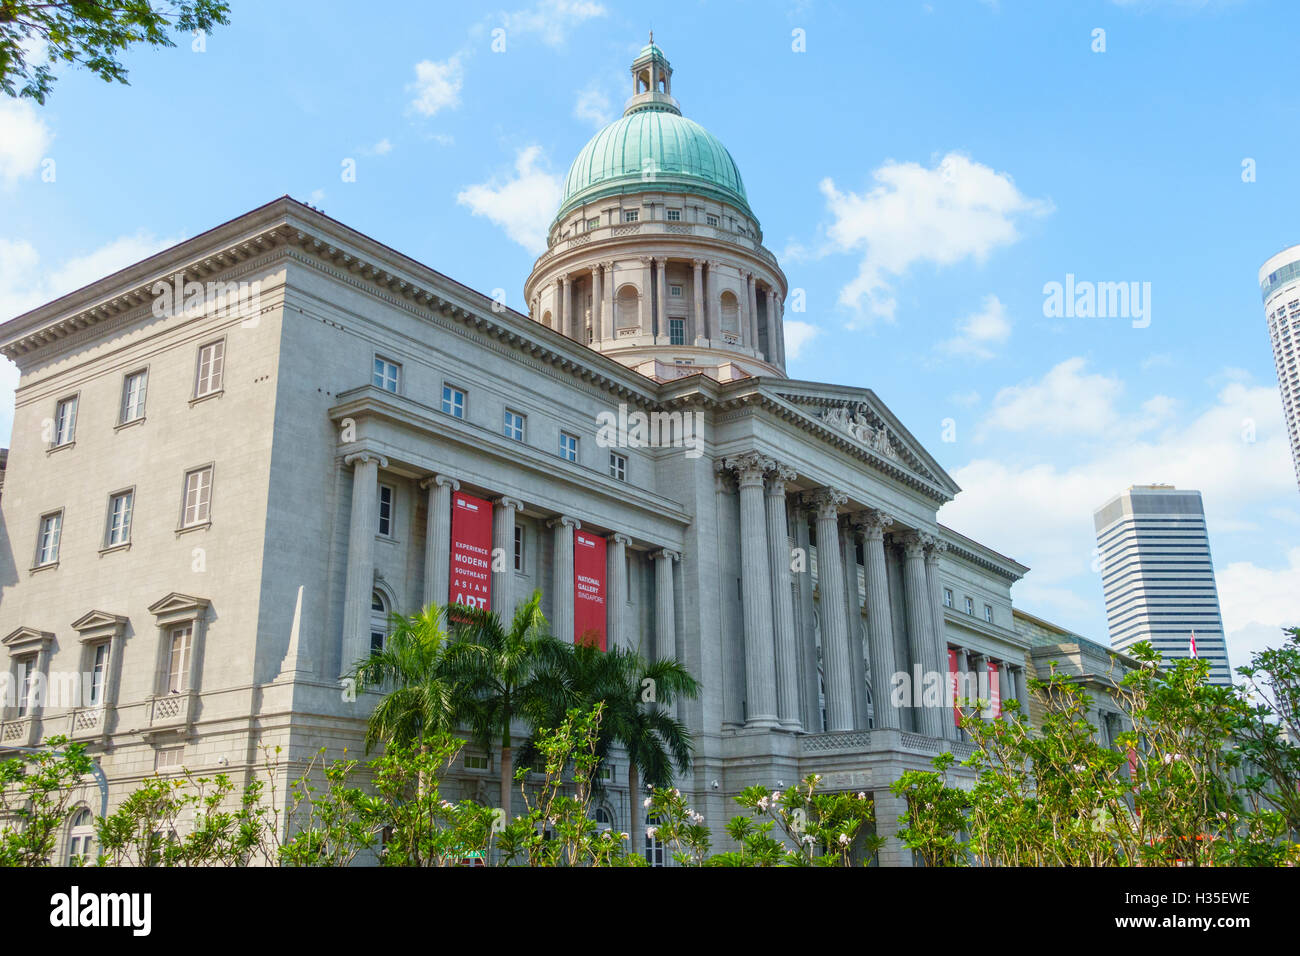 National Gallery Singapore occupying the former City Hall and Old Supreme Court Building, Singapore Stock Photo